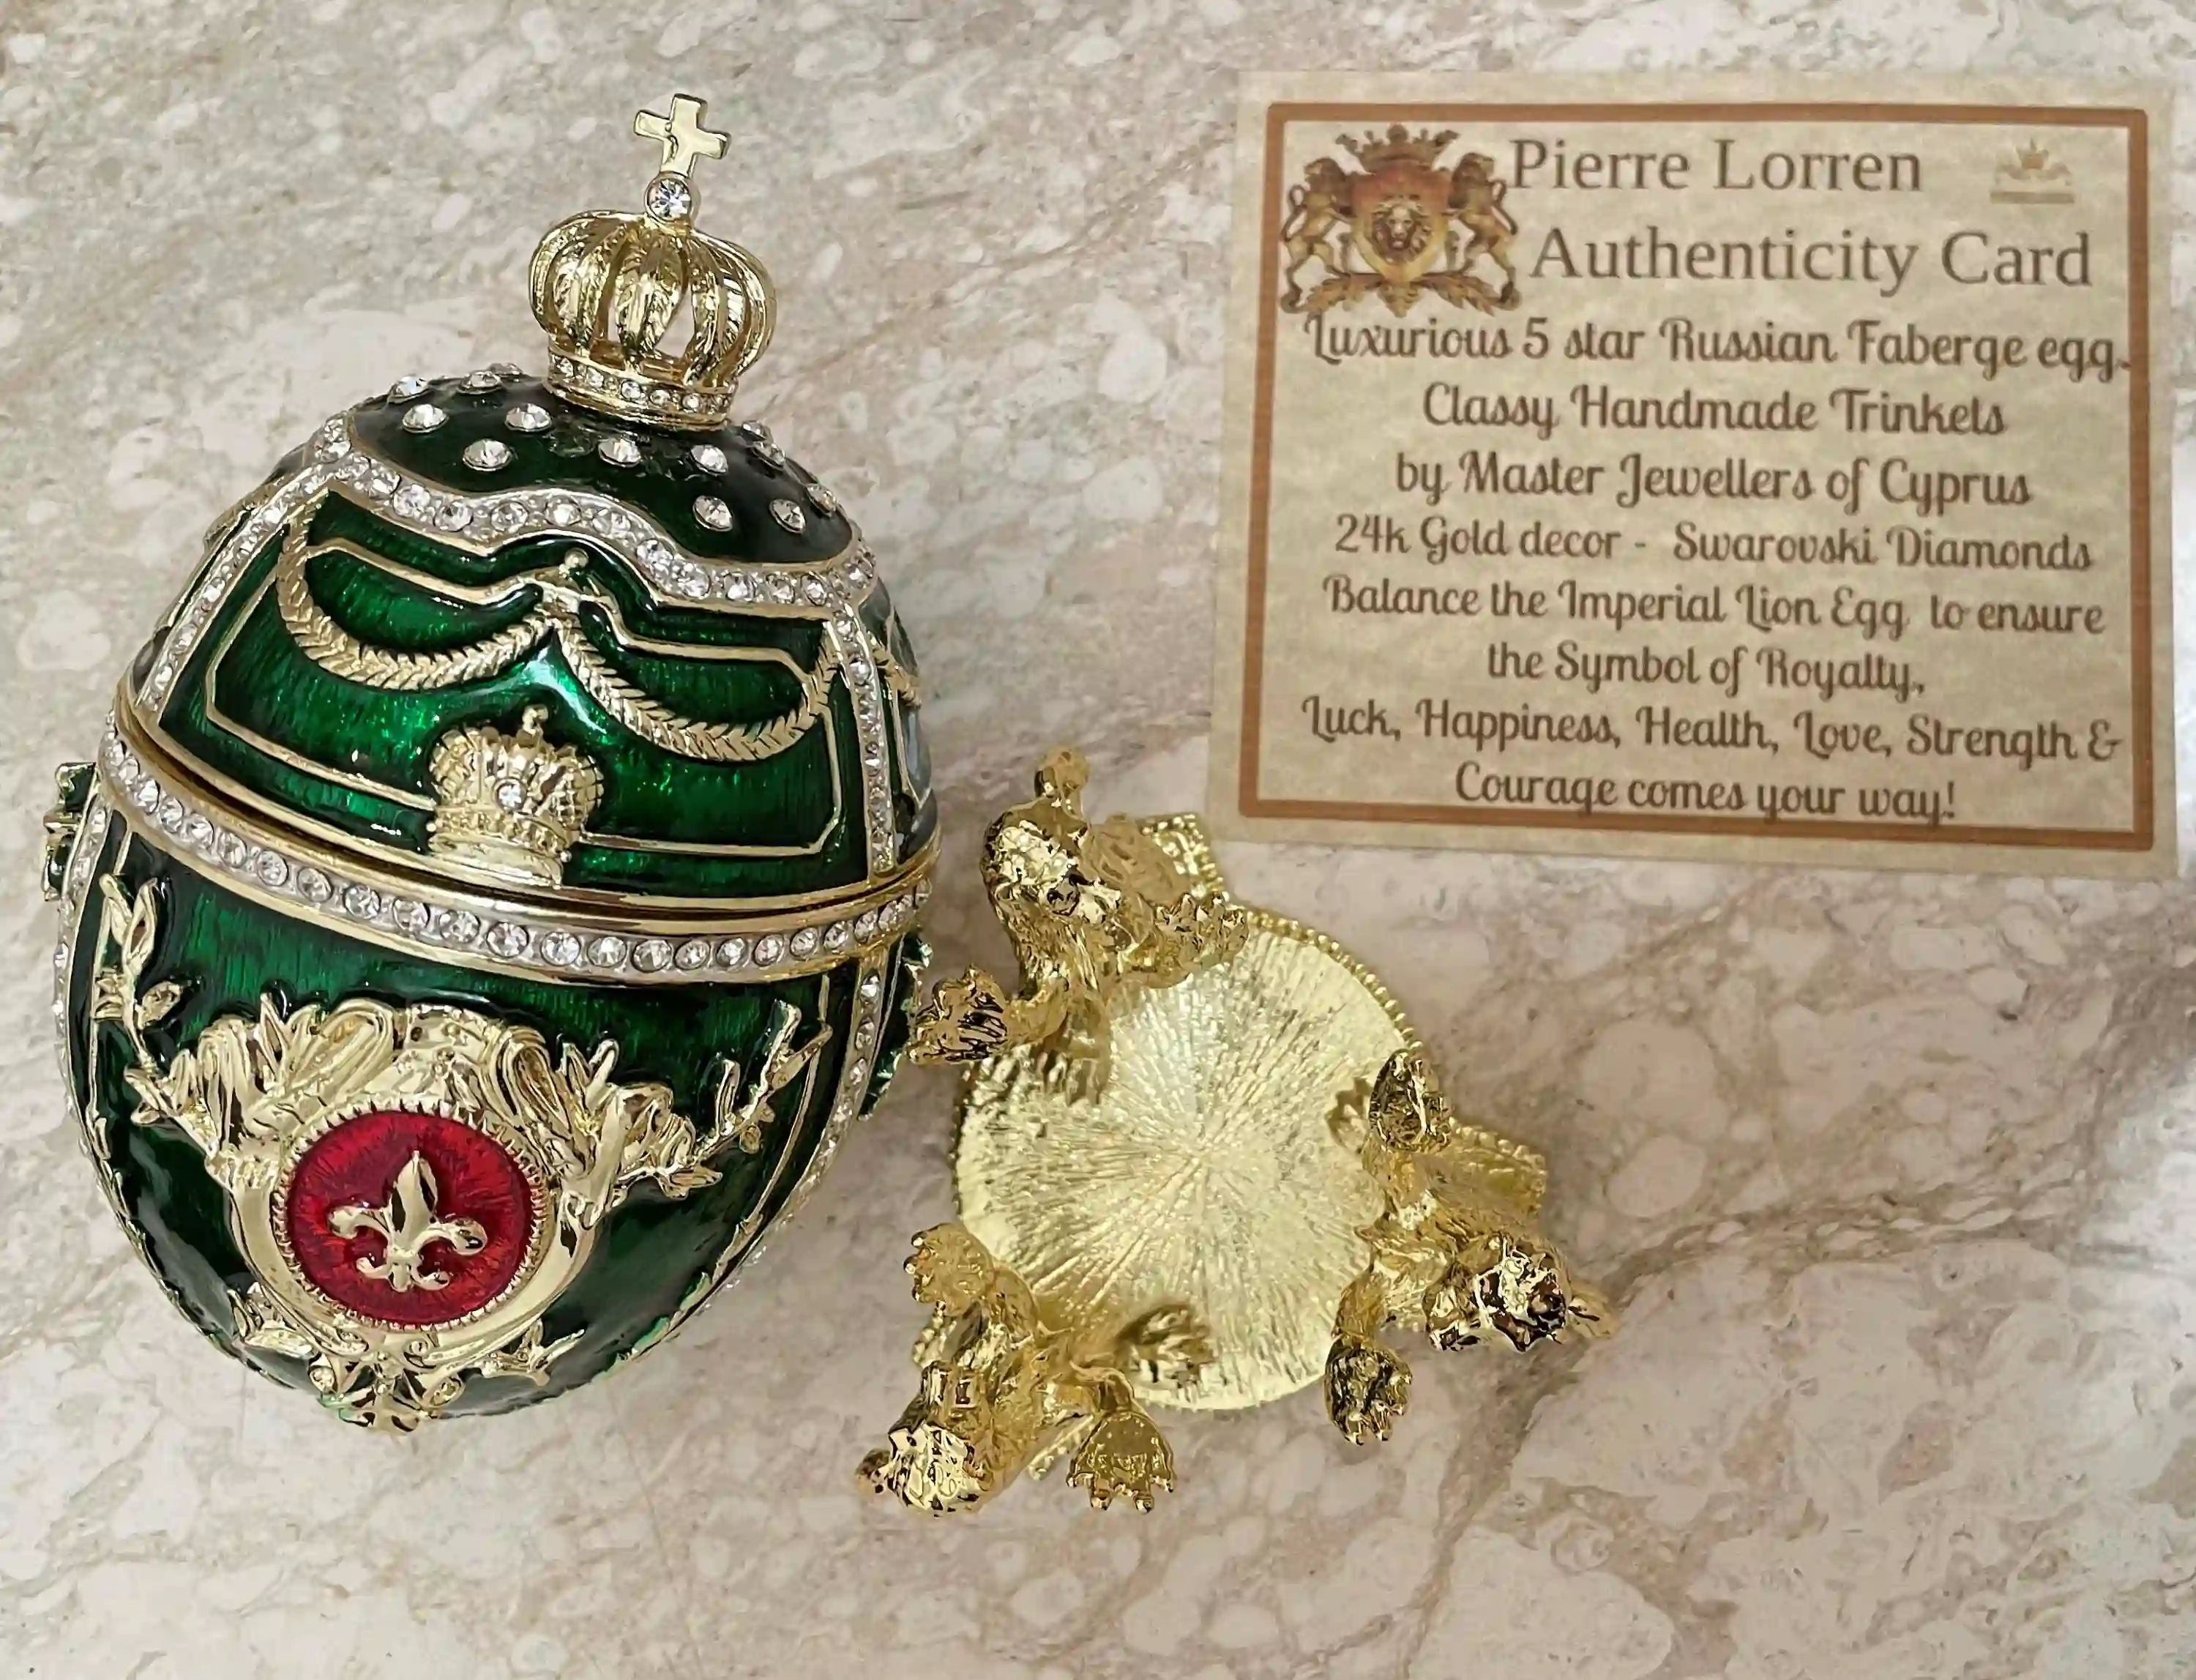 Emerald Faberge egg Ornament Faberge style Easter egg Home decor gift for her 24k GOLD 300 SWAROVSK HANDSET Bday Faberge Unique Jewelry box 